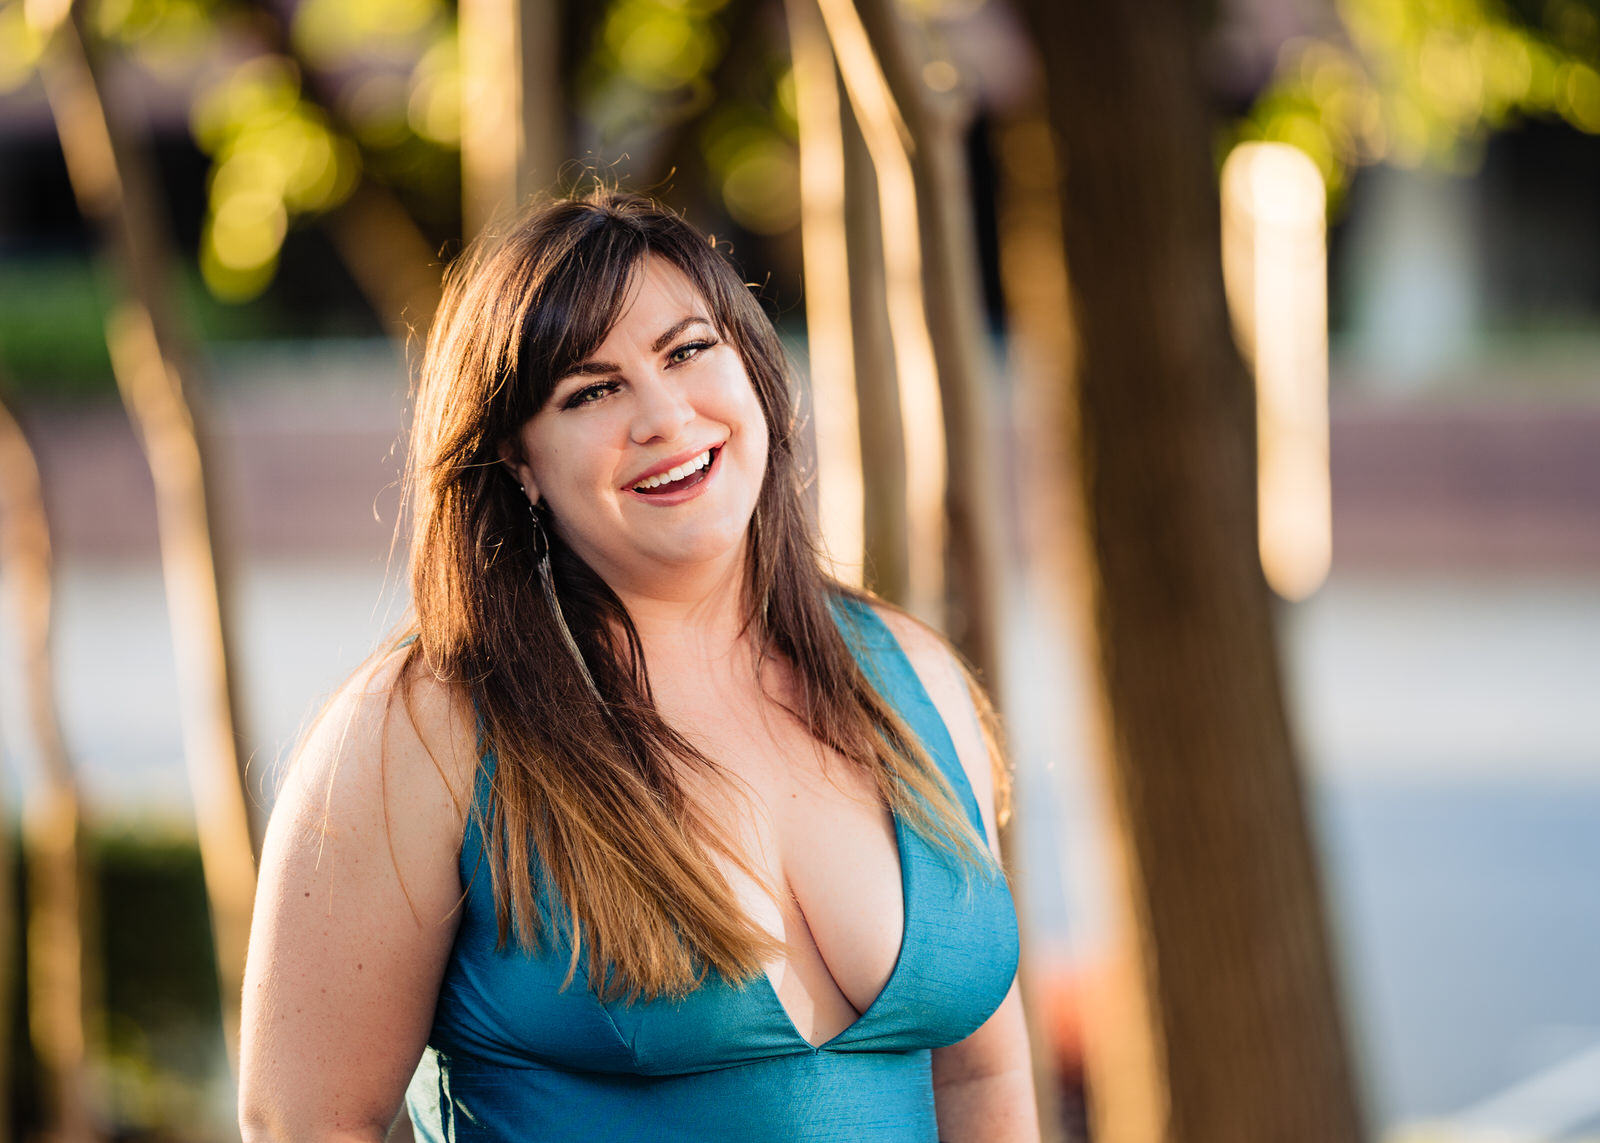 Woman in a teal dress laughing toward the camera